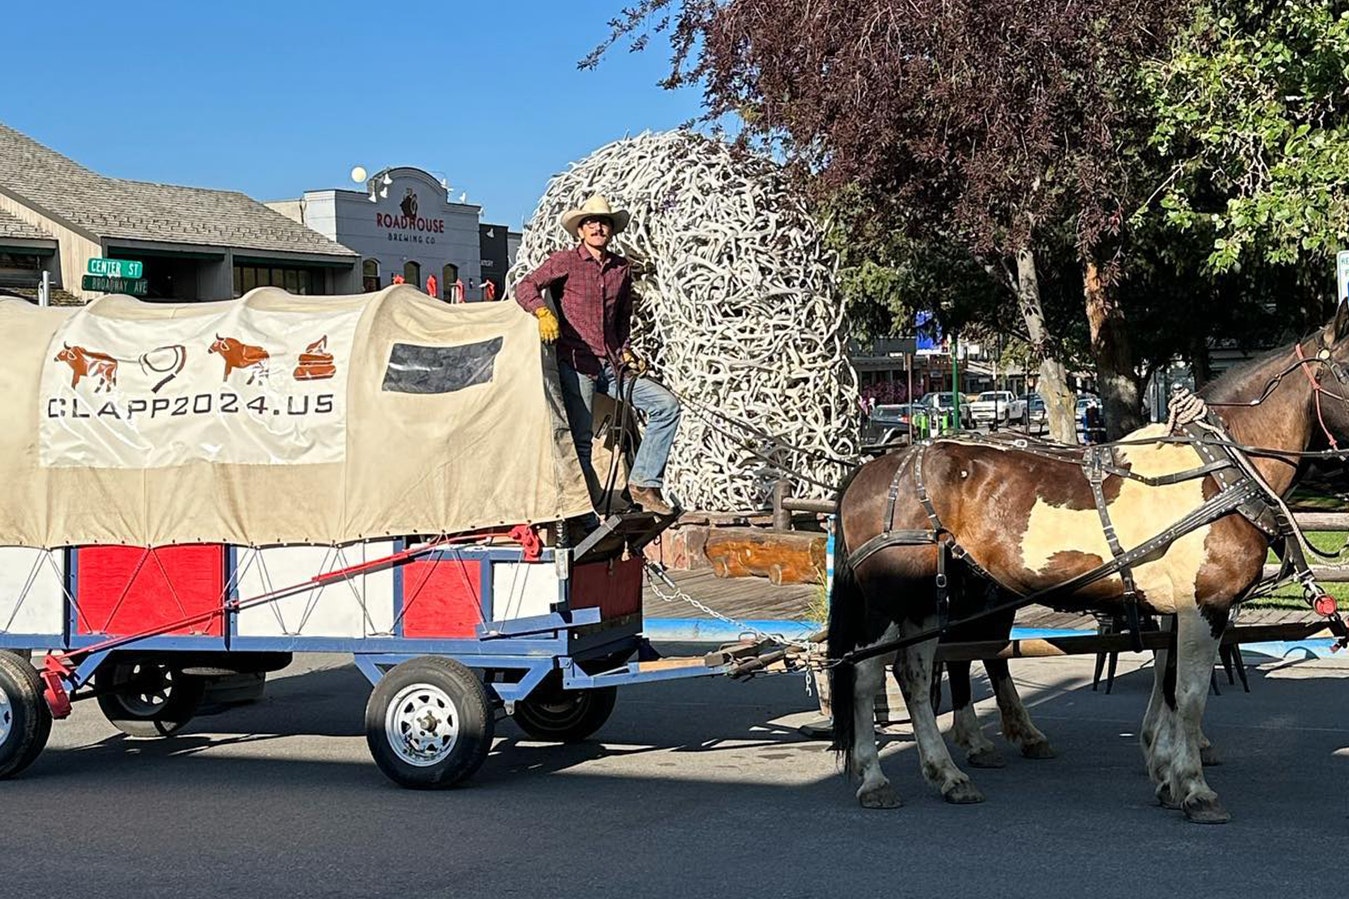 Walter Clapp, a 35-year-old attorney from Red Lodge, Montana, is taking his horse-drawn wagon around Wyoming and other states in a long shot bid for the White House in 2024.